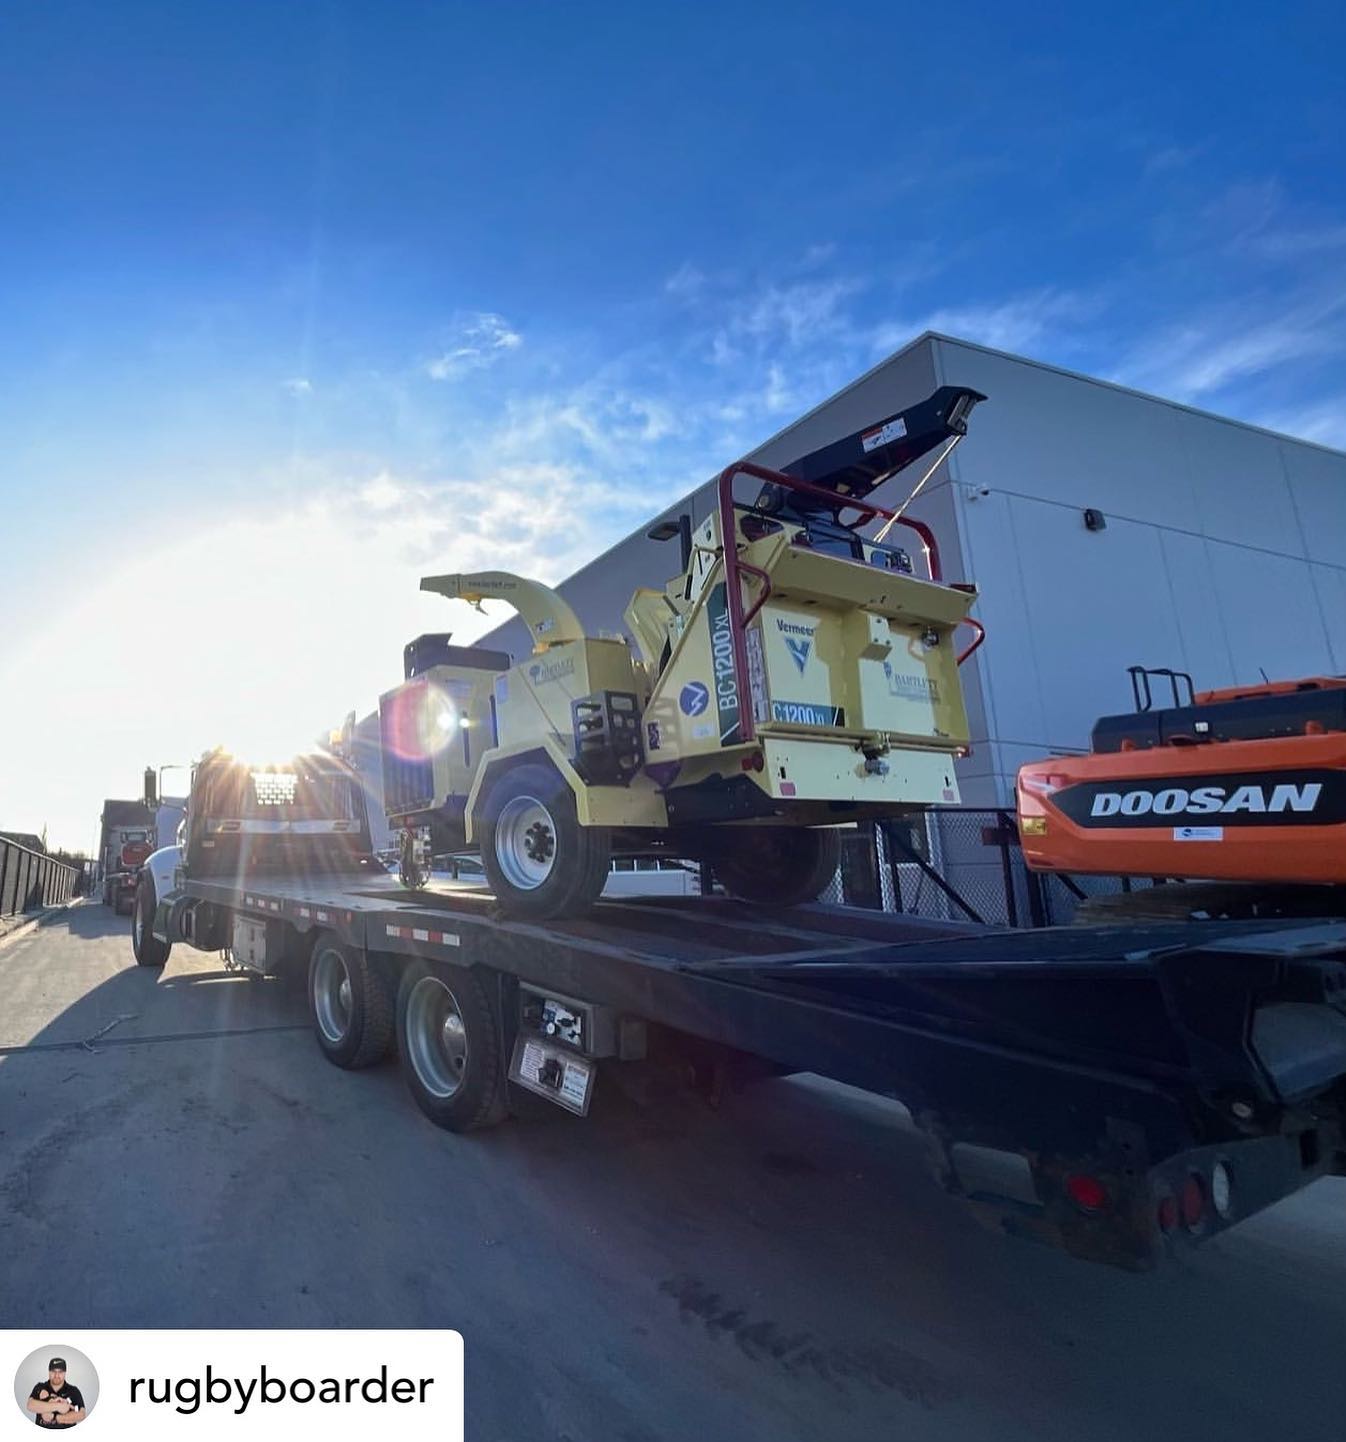 #repost @rugbyboarder Off to it’s new home. Thanks @bartletttreeexpertscanada Did you know that you can get custom paint on your factory orders? Reach out to find out more @vermeerbc #vermeerchipper #paint #arborist #whatcolorwouldyouget